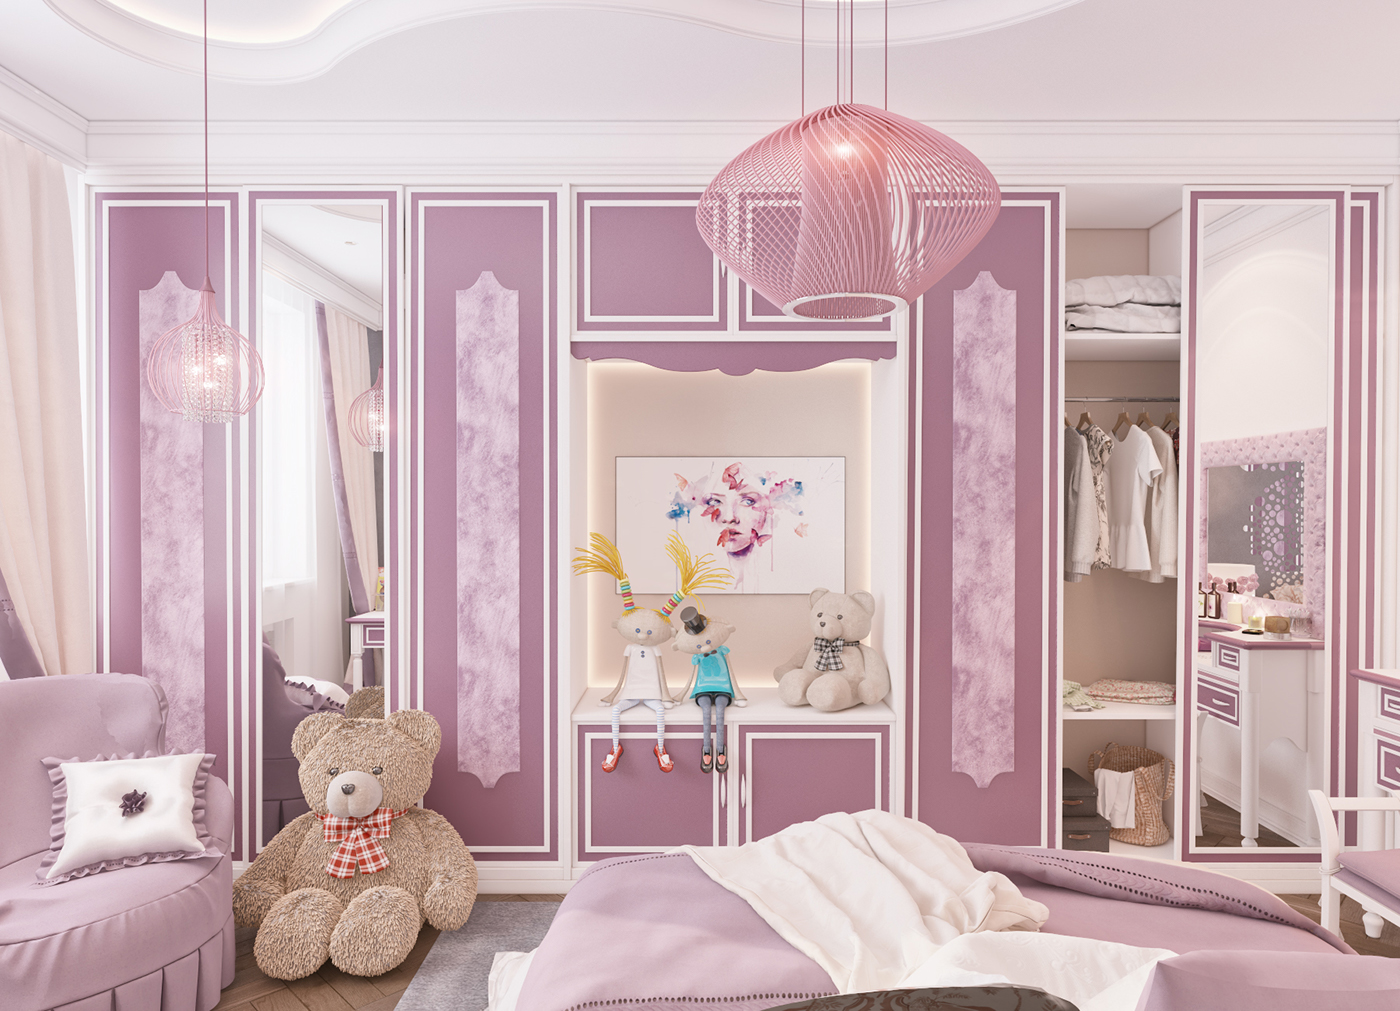 room girl bedroom gilrbedroom apartment luxry amazing visualization rendering camera